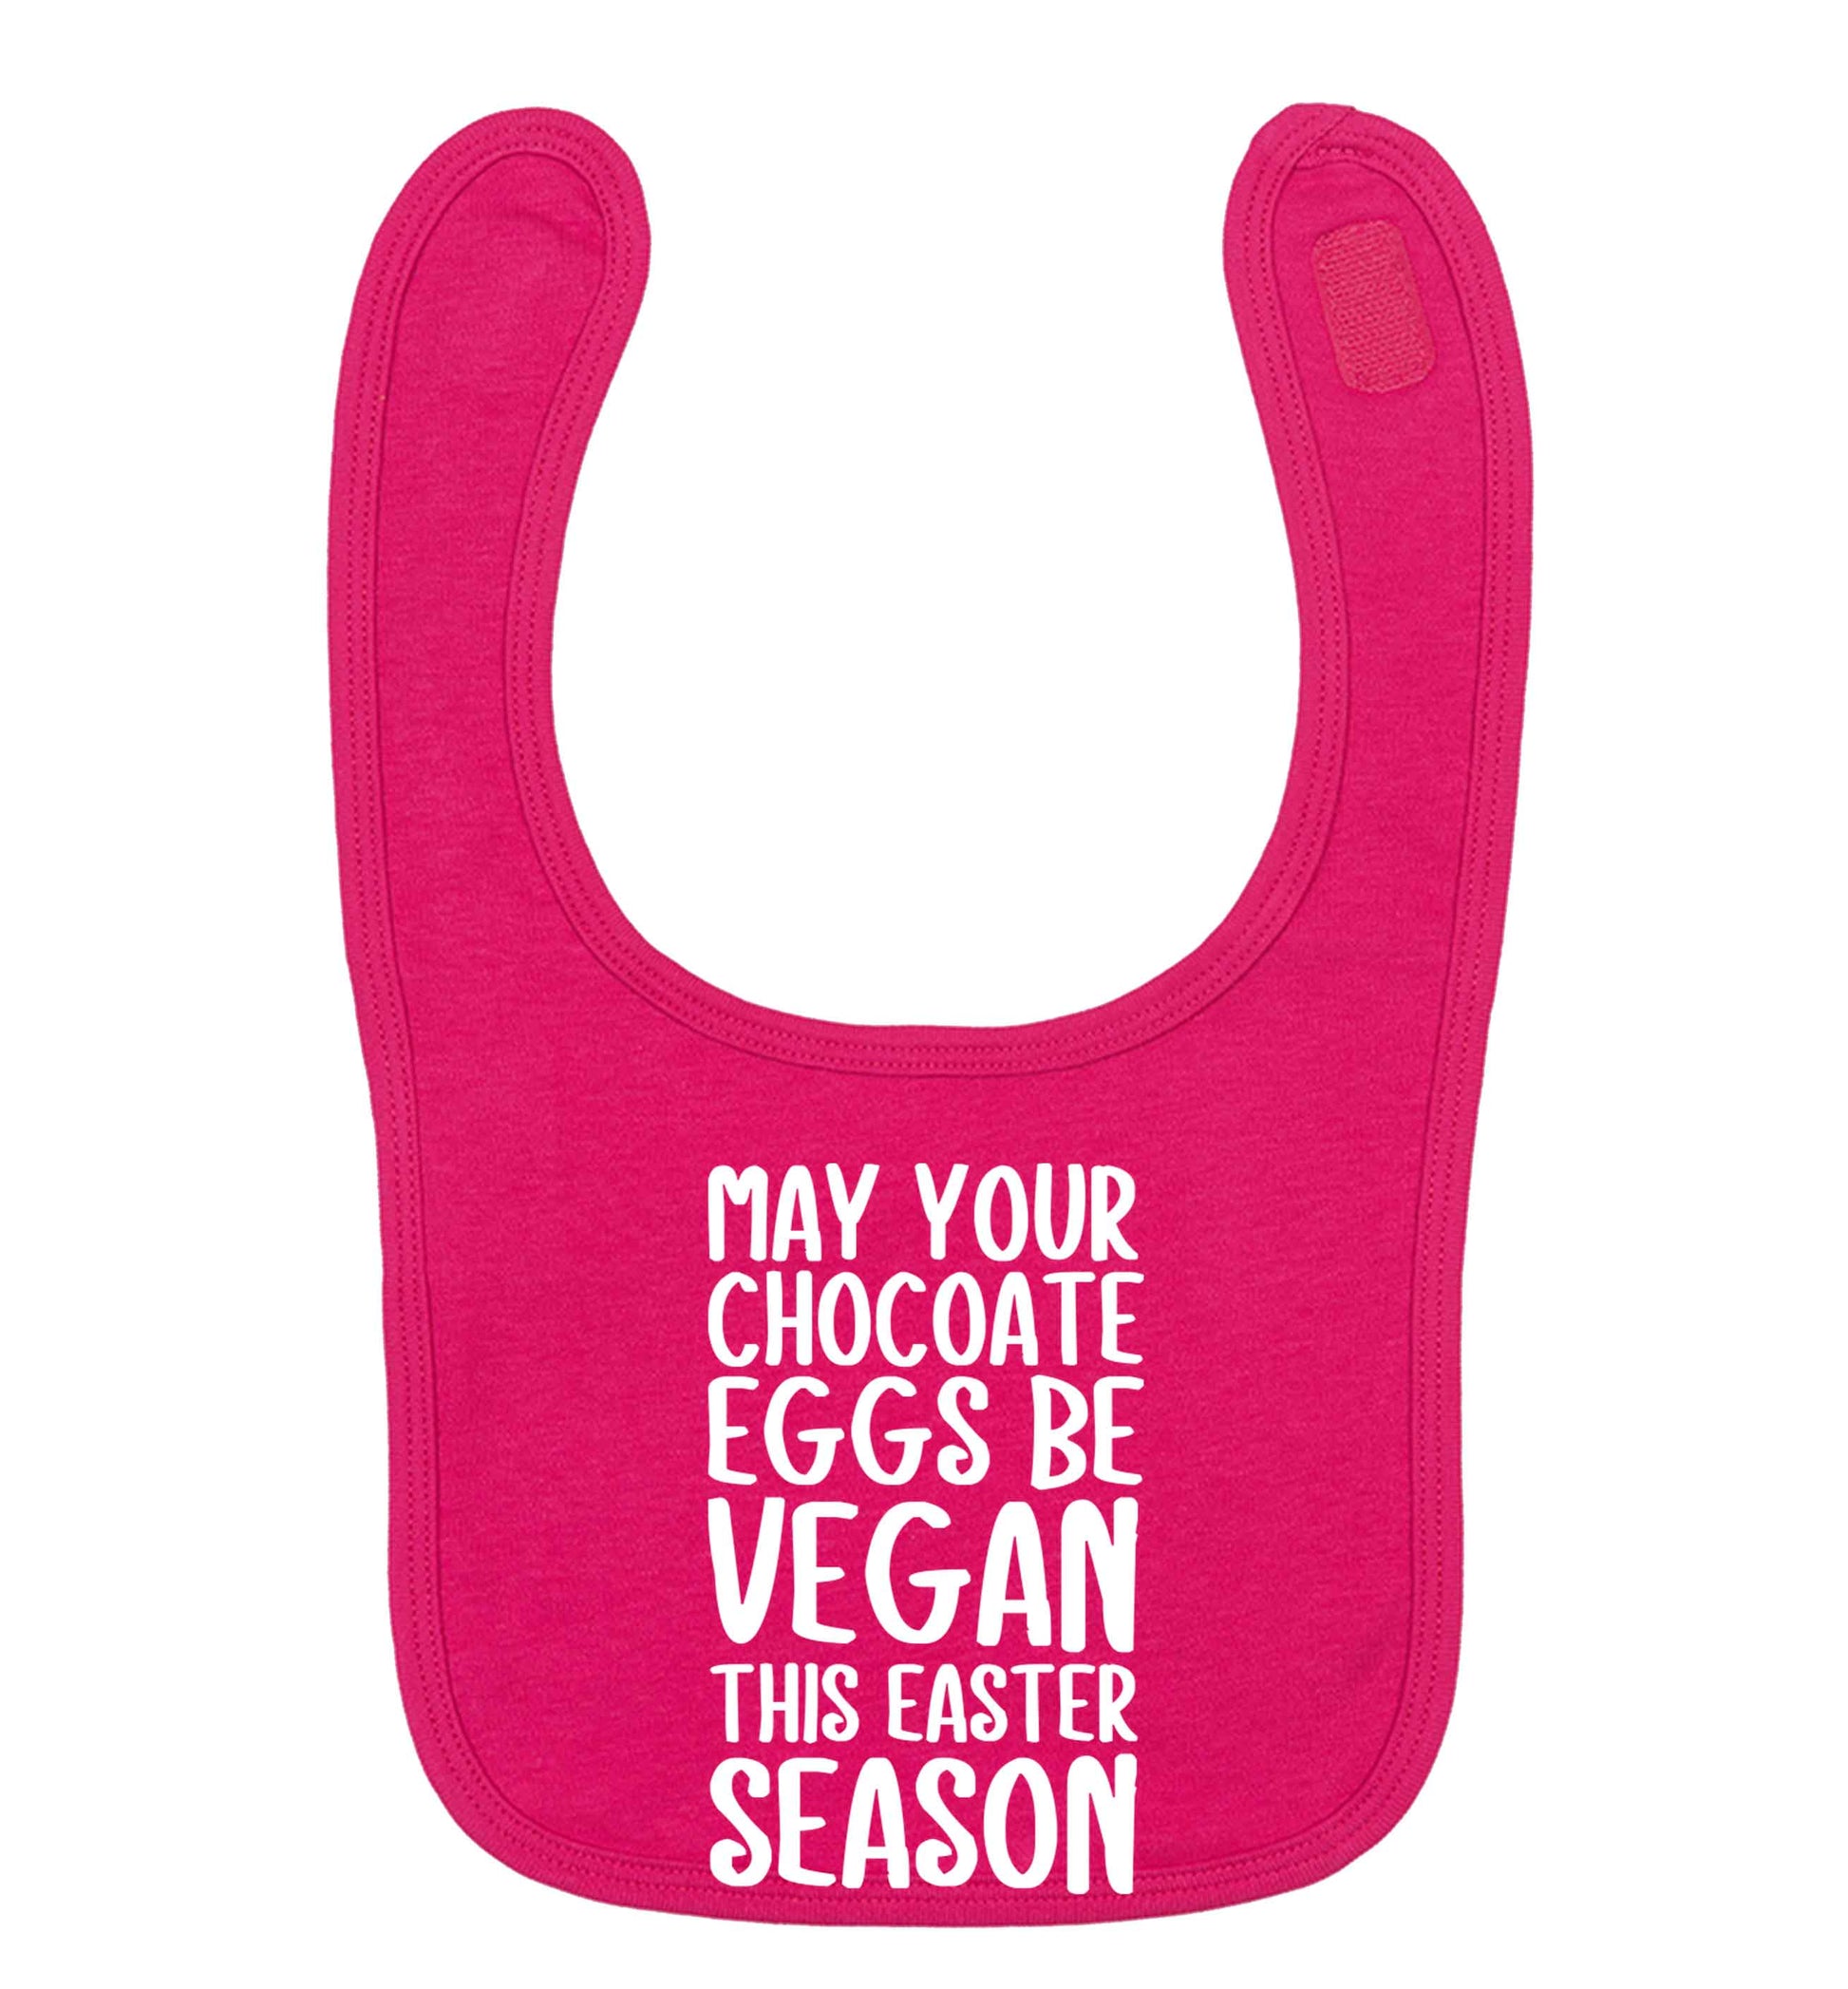 Easter bunny approved! Vegans will love this easter themed dark pink baby bib